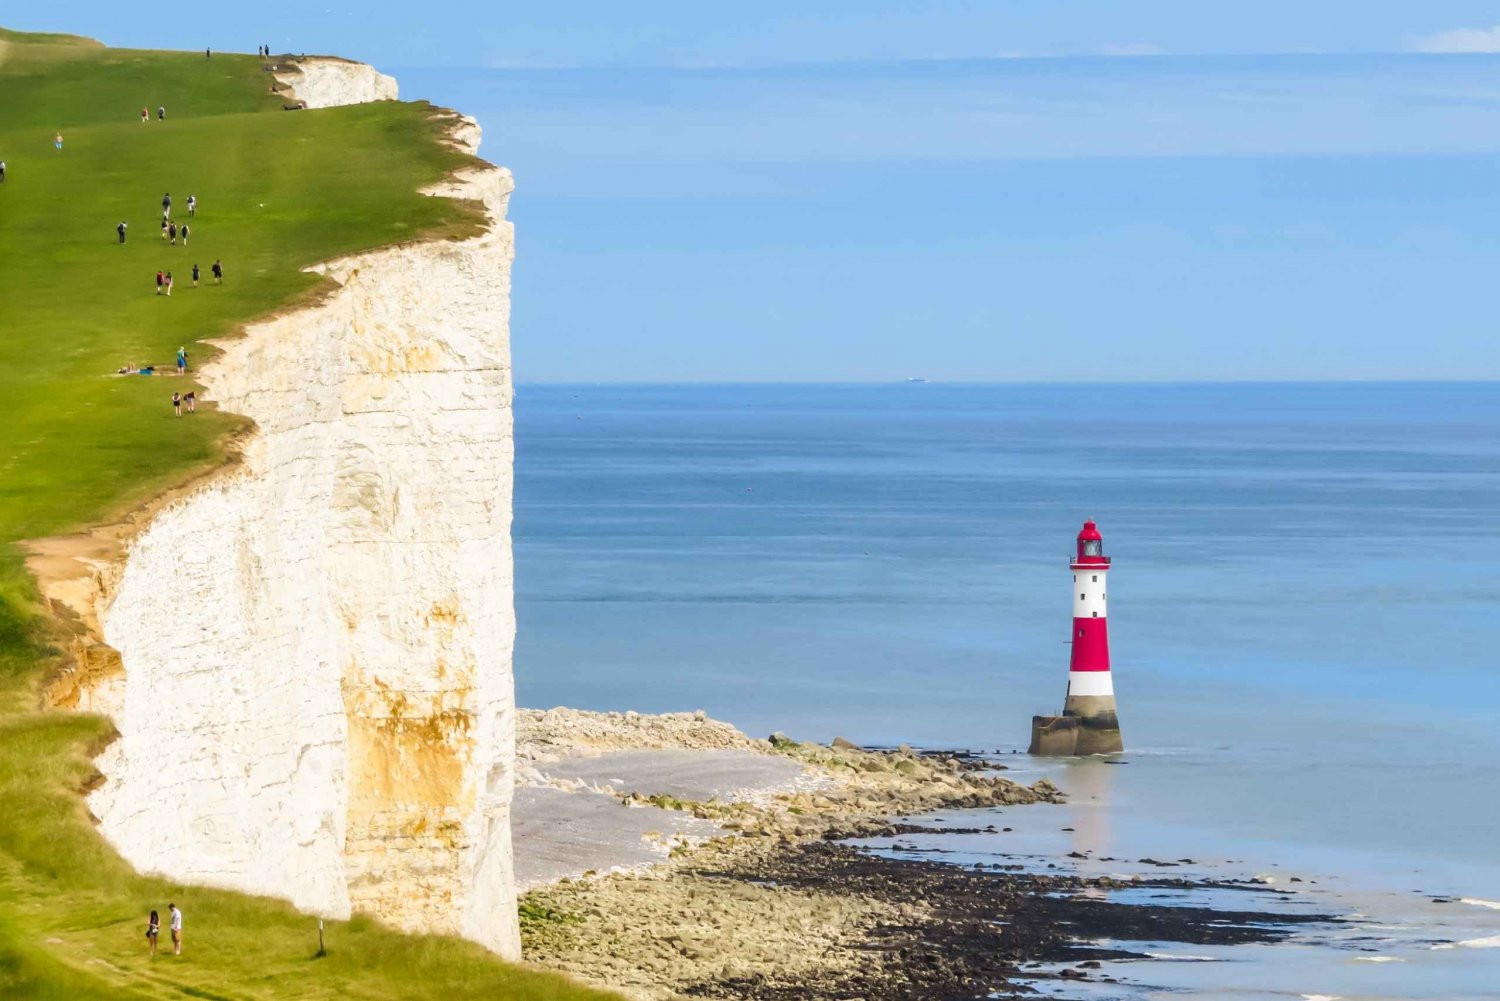 Seven Sisters and South Downs Tour